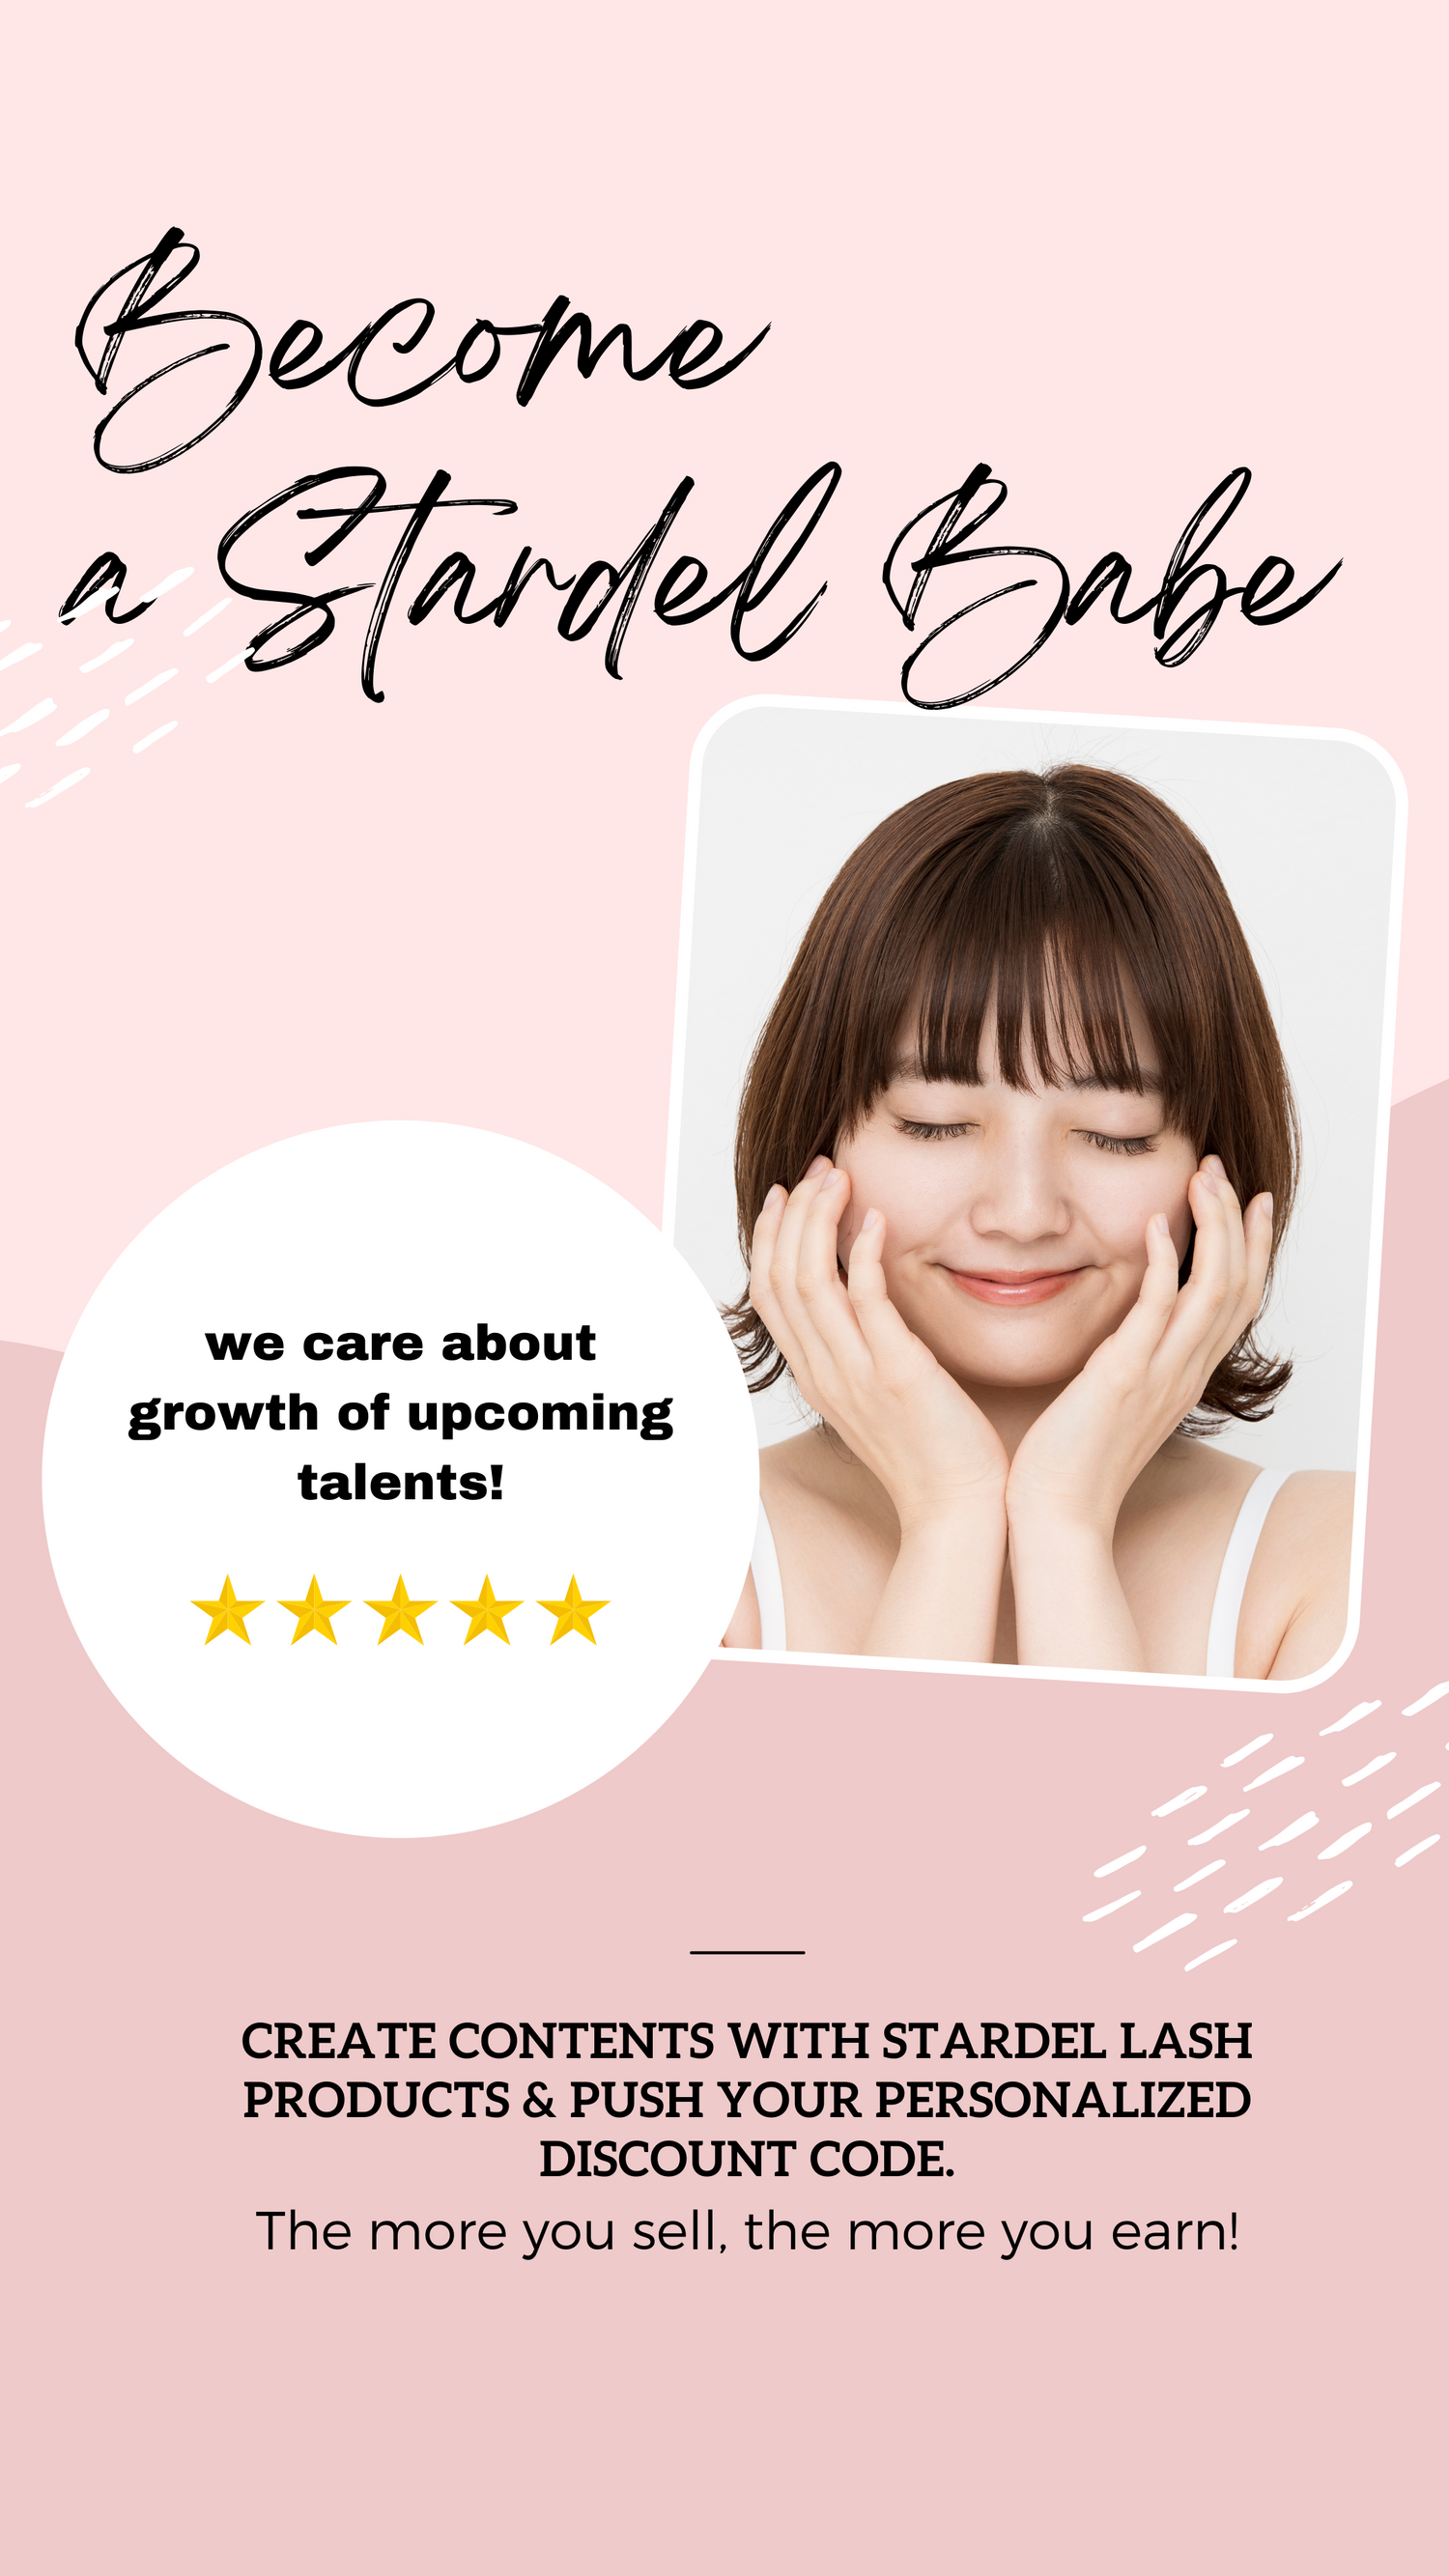 Stardel Babe affiliate promo image with smiling Asian girl and star rating